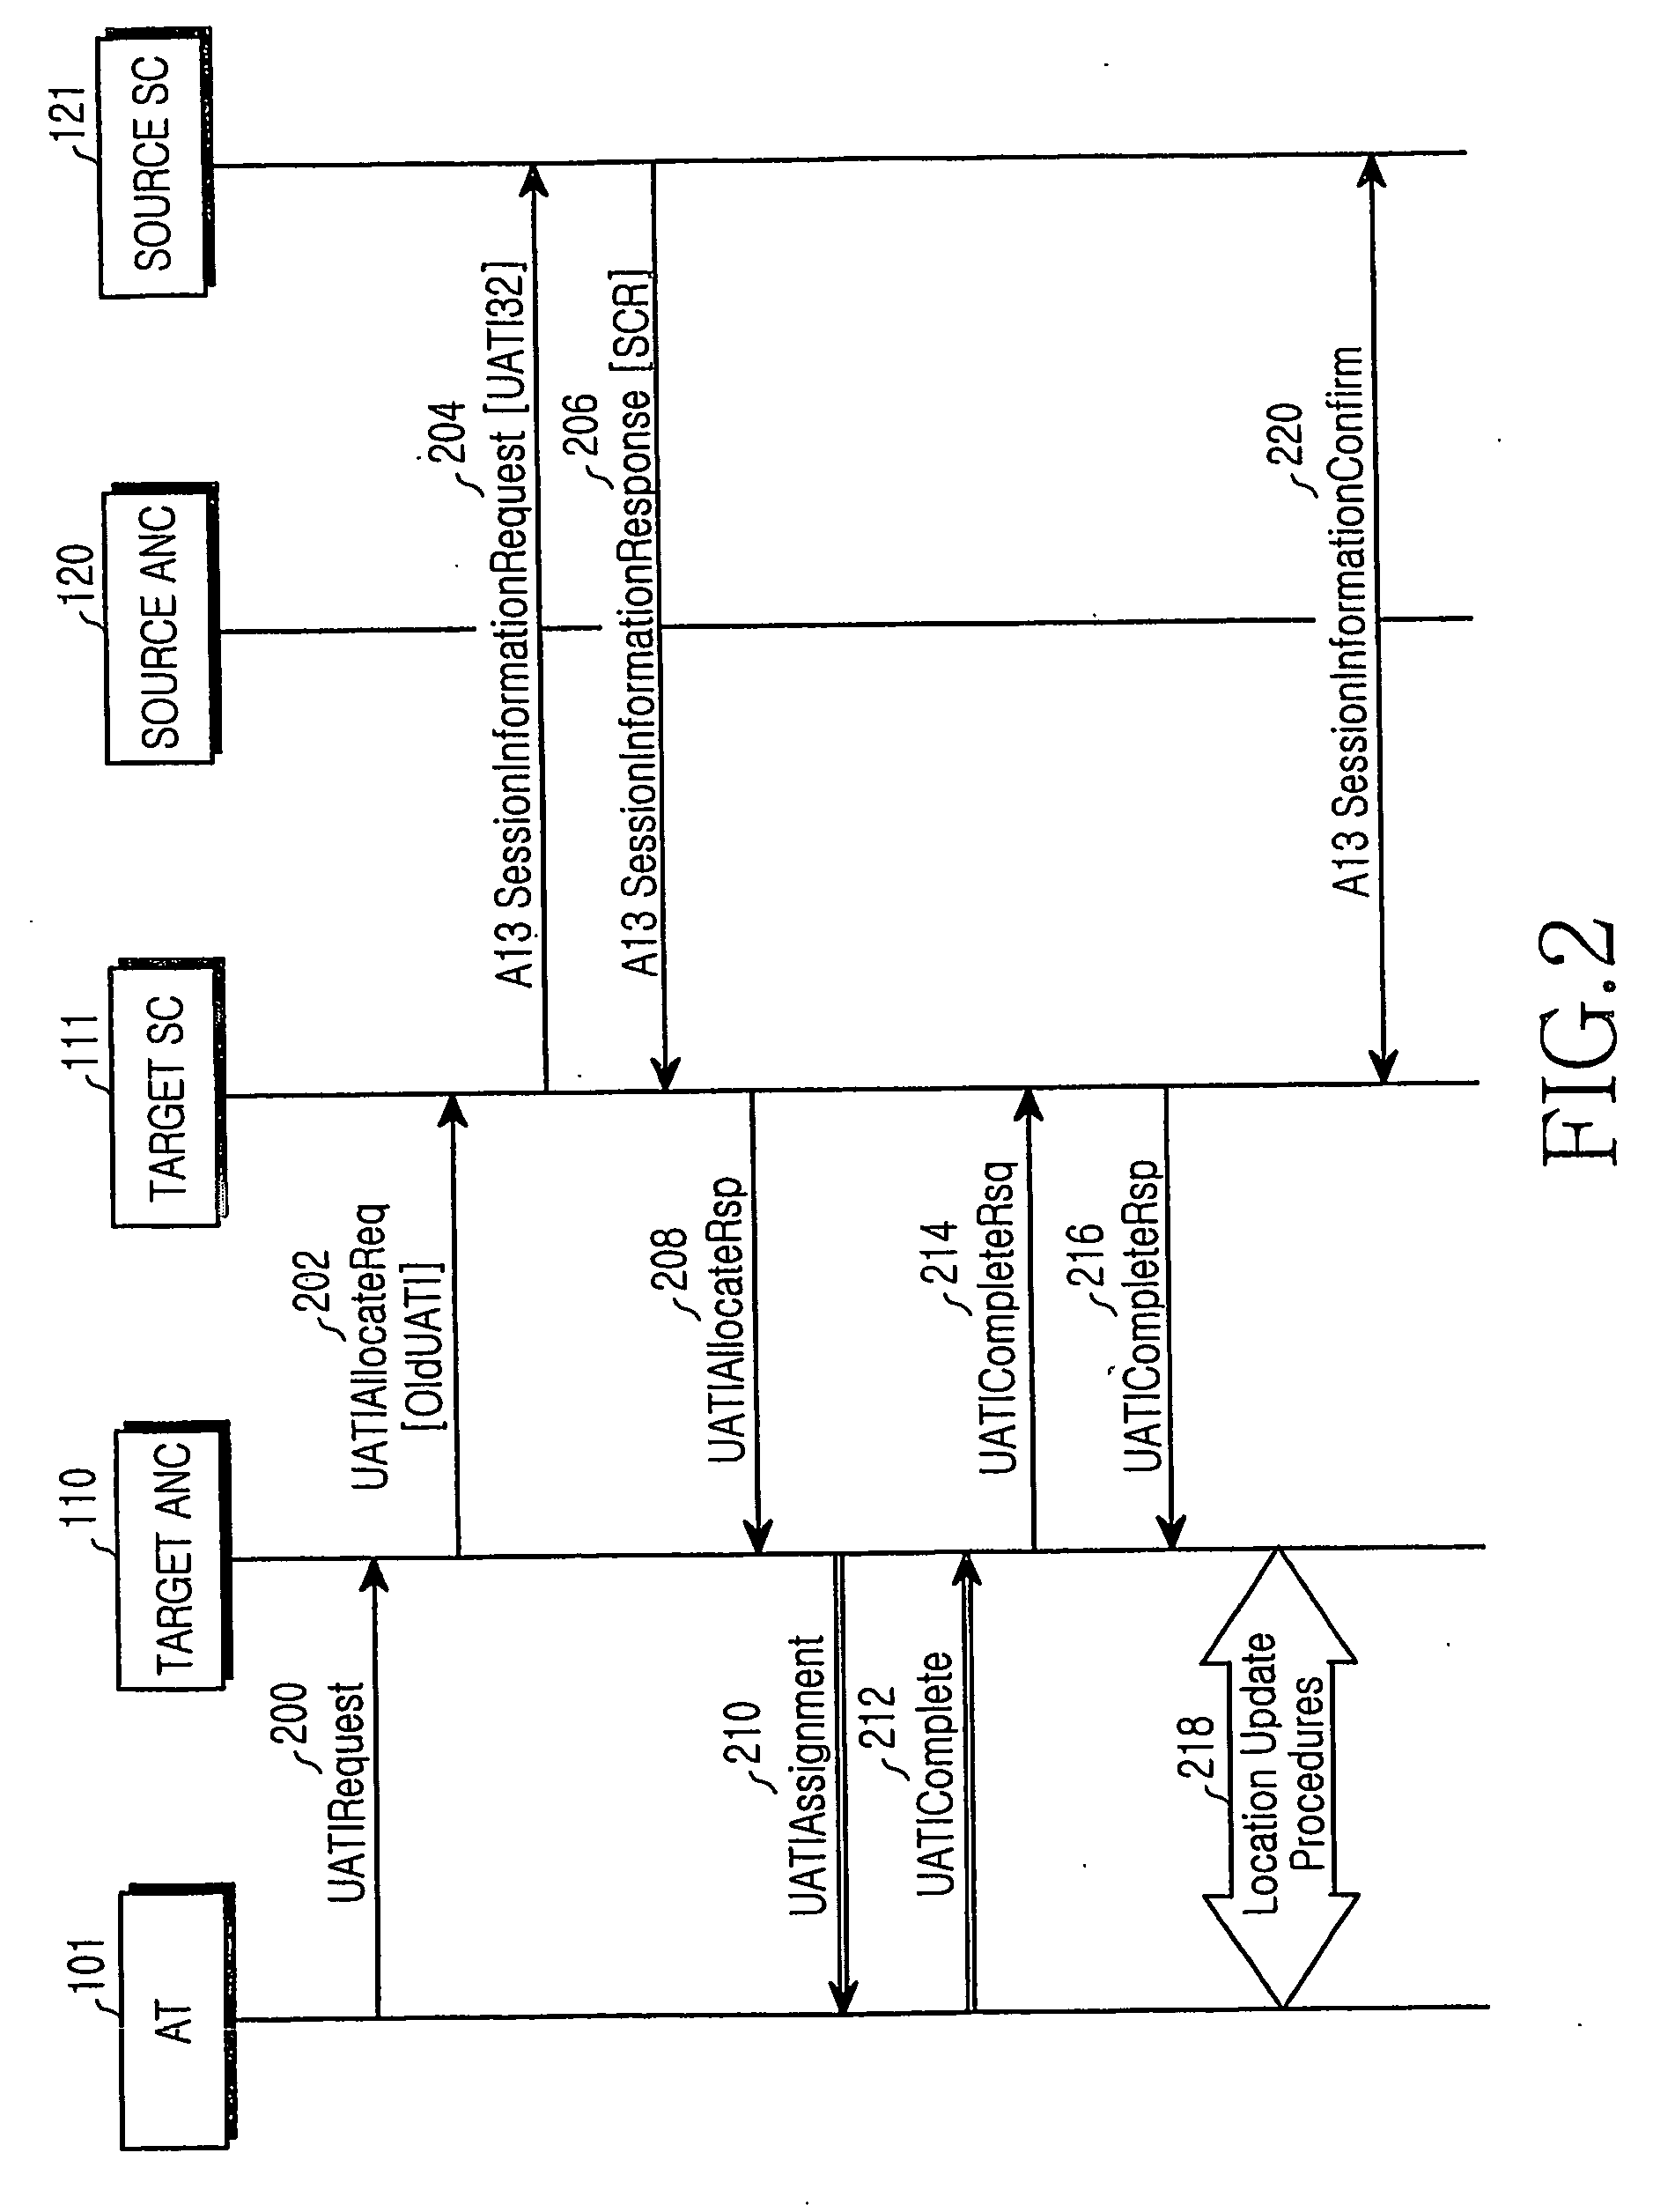 Handoff method in a high-rate packet data mobile communication system